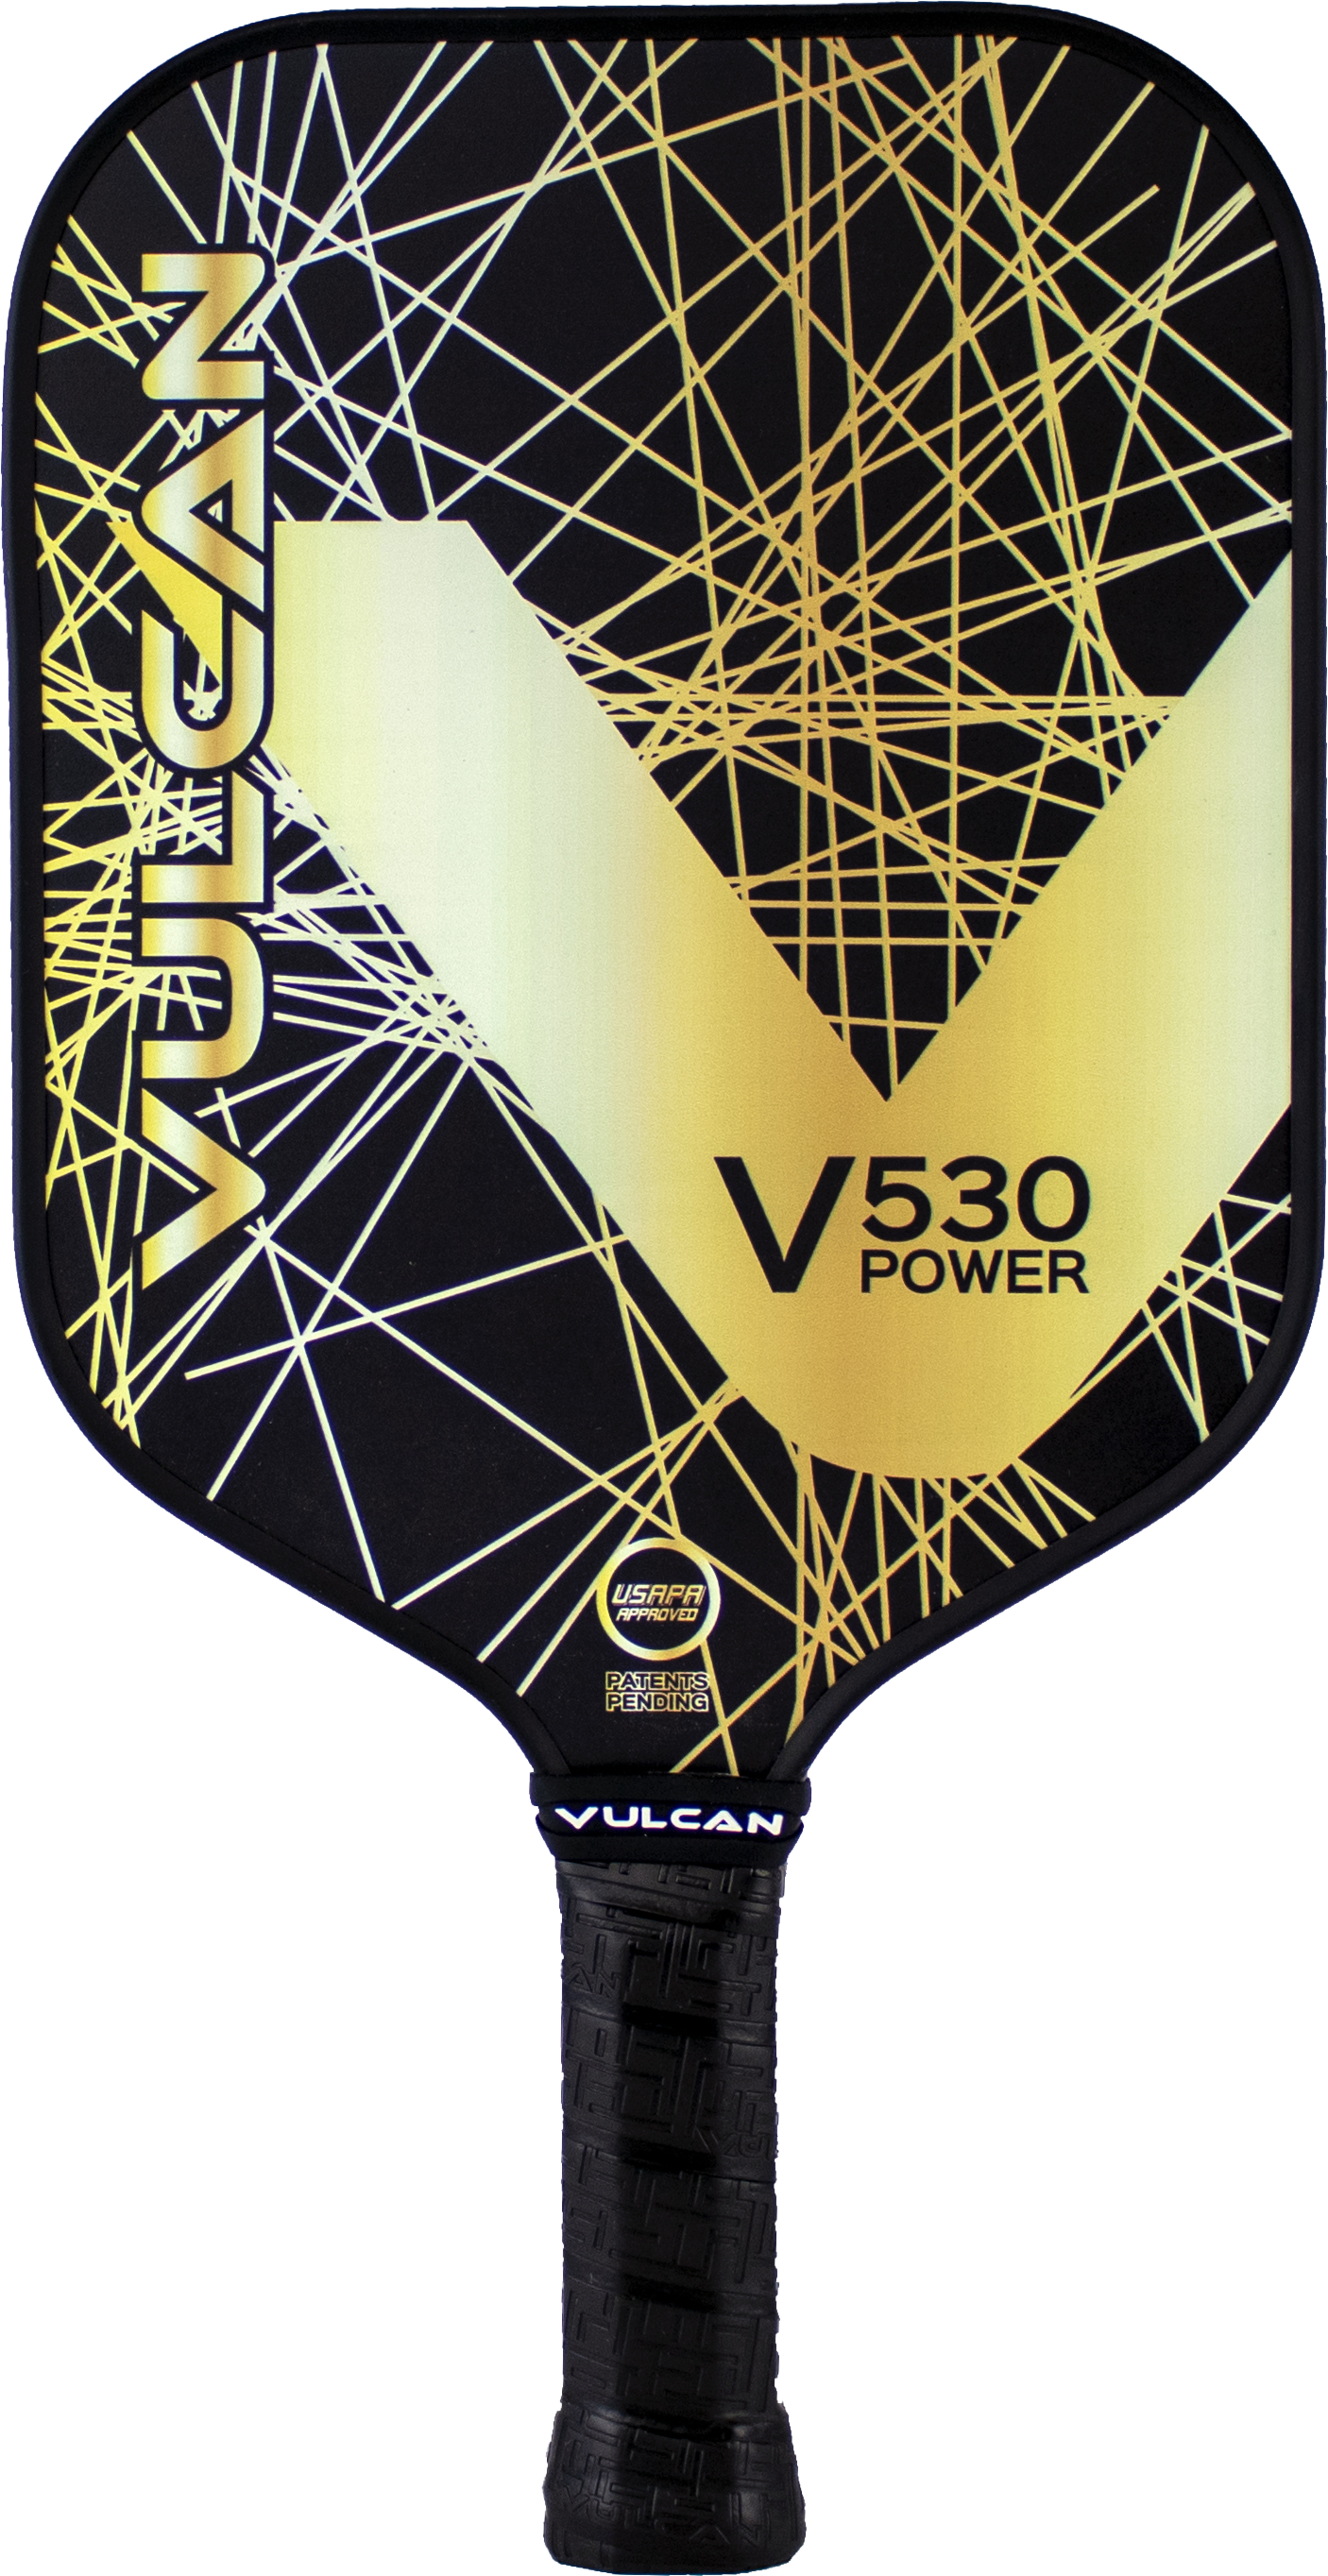 A Vulcan V530 Power Pickleball Paddle with a black handle.